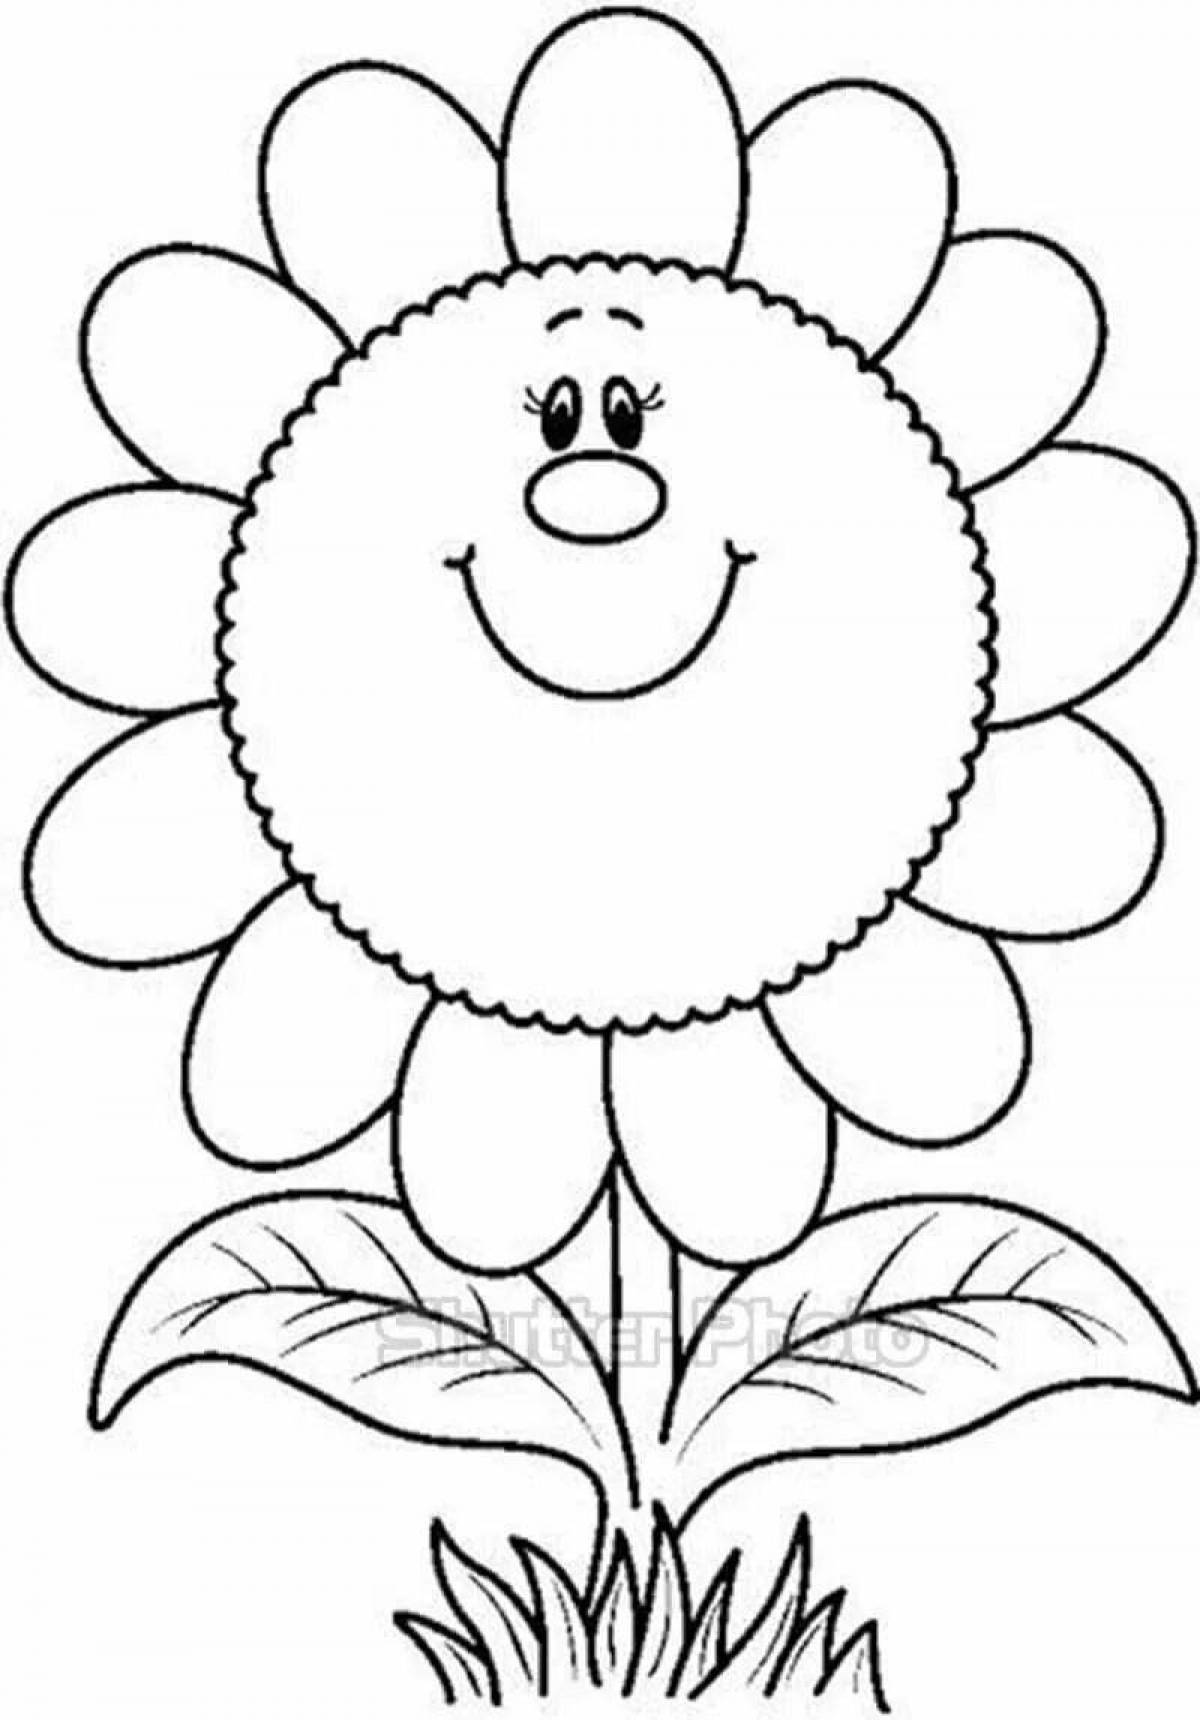 Playful flower coloring for toddlers